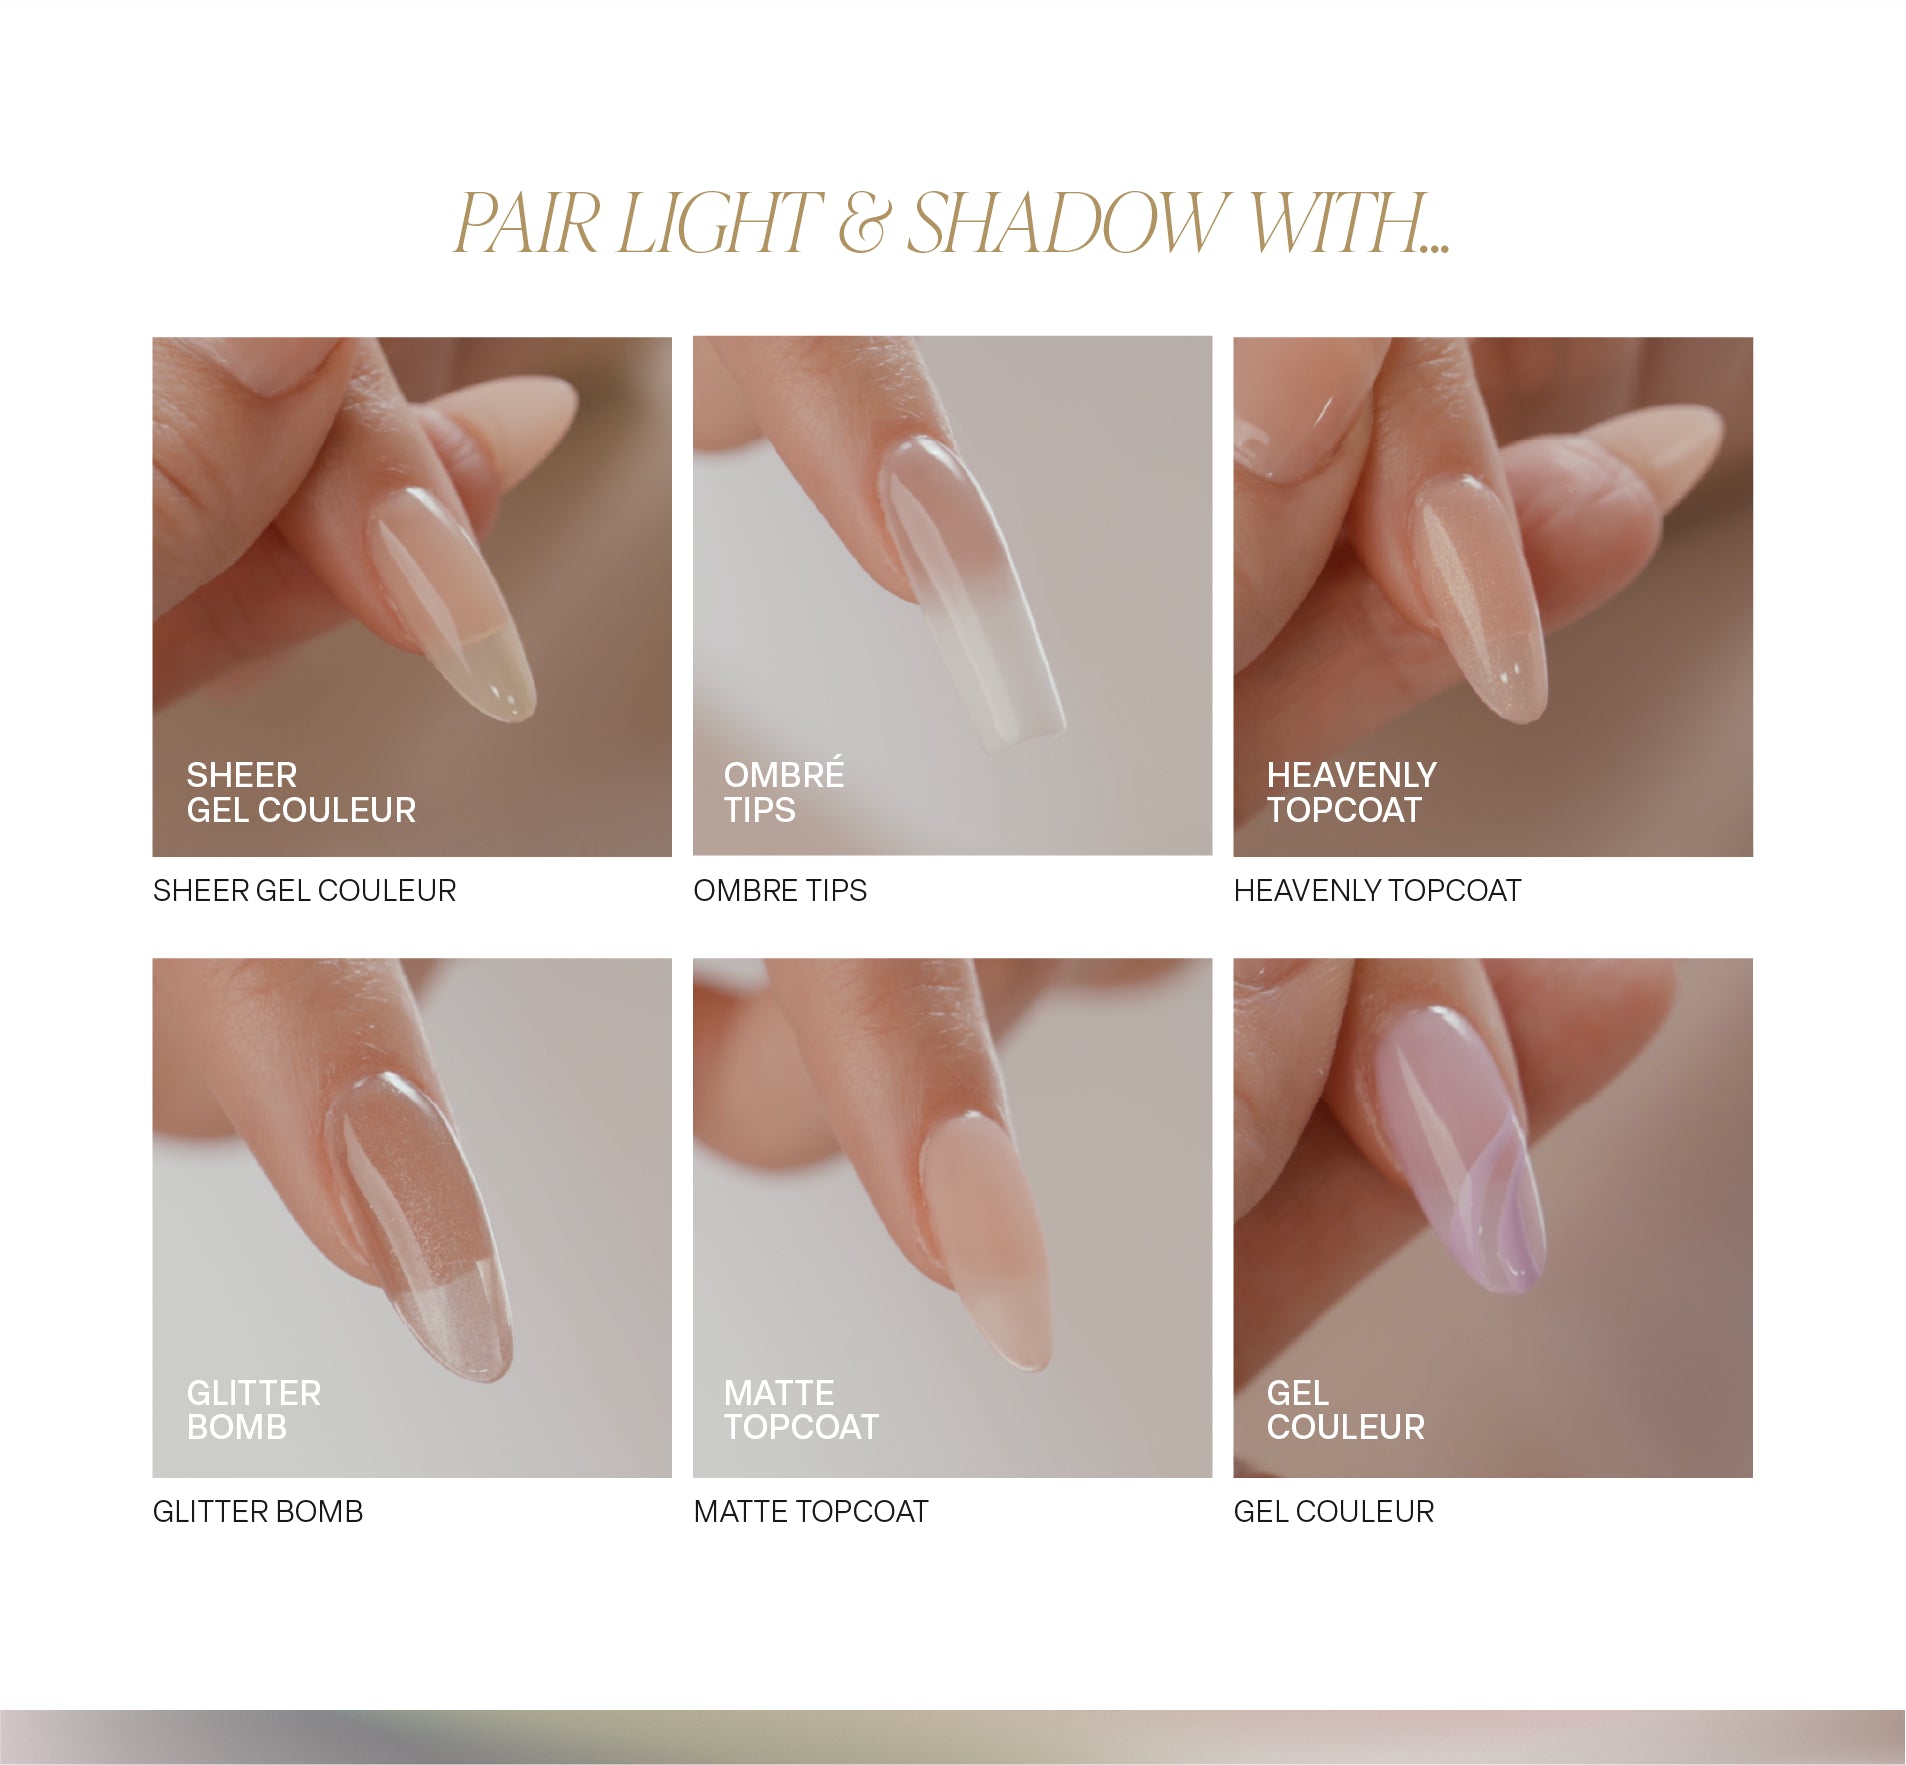 Light & Shadow gel color pairs beautifully with many other great Aprés products such as Ombré Gel-X or gel color